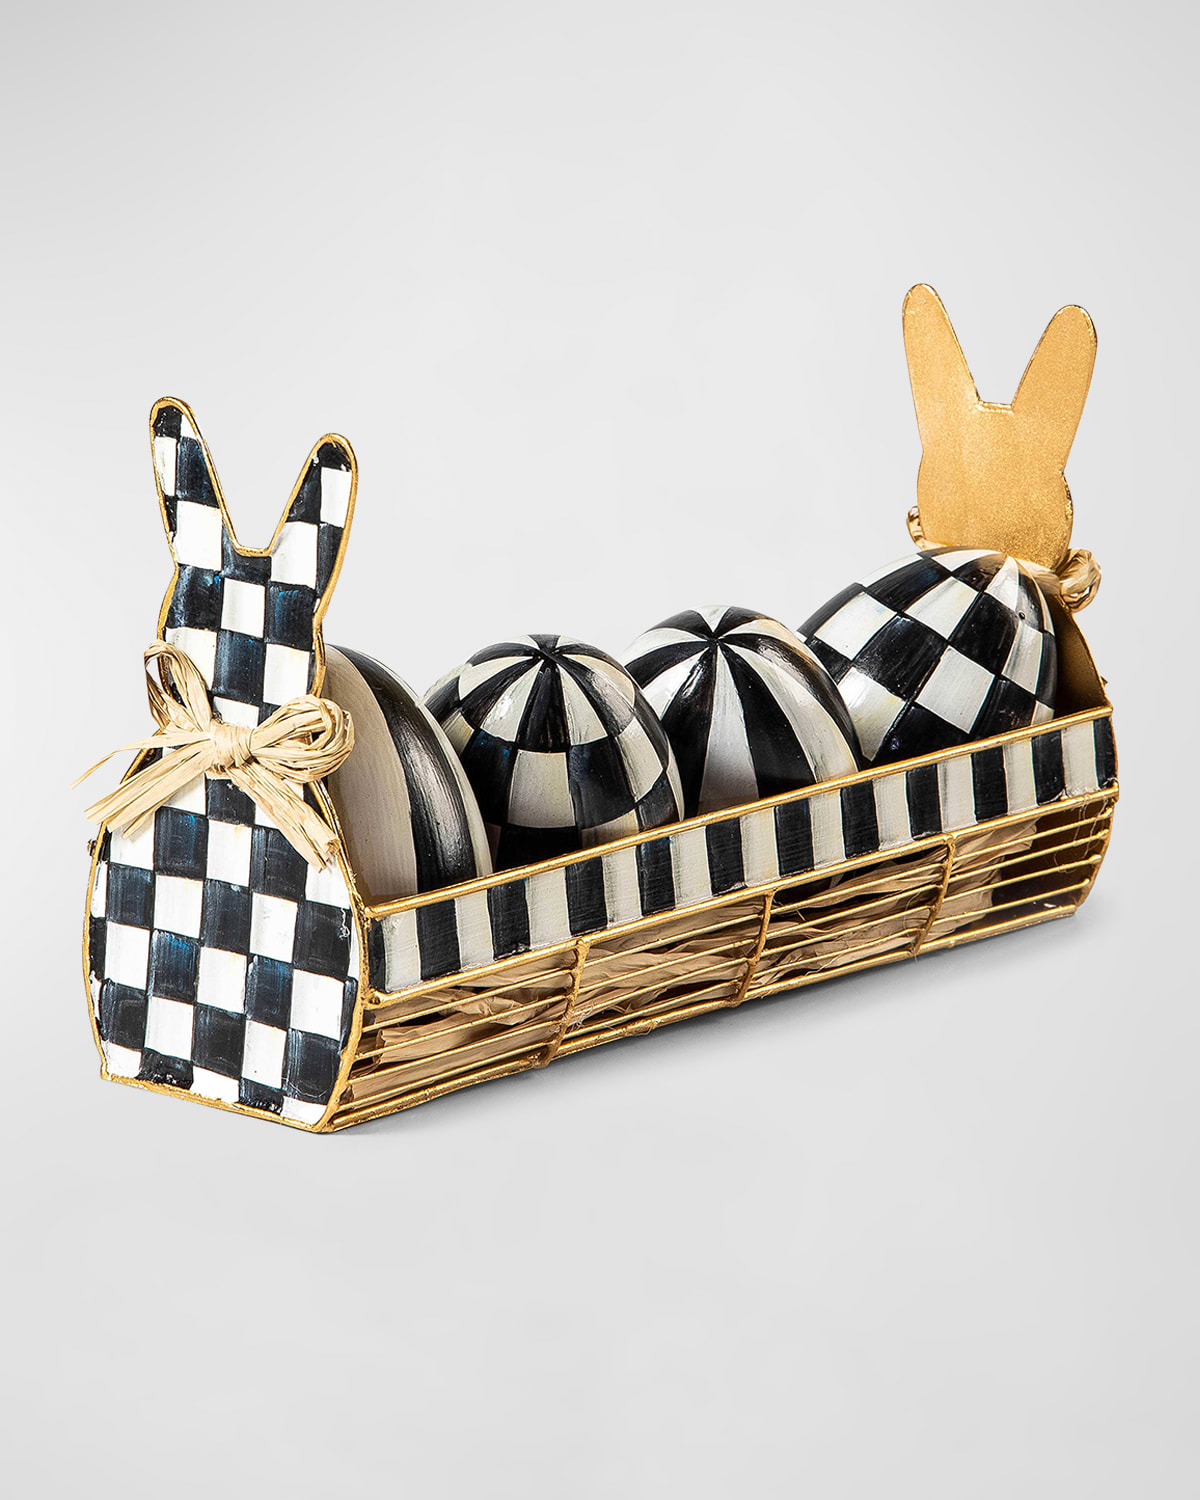 Mackenzie-childs Courtly Check Egg Tray In Black